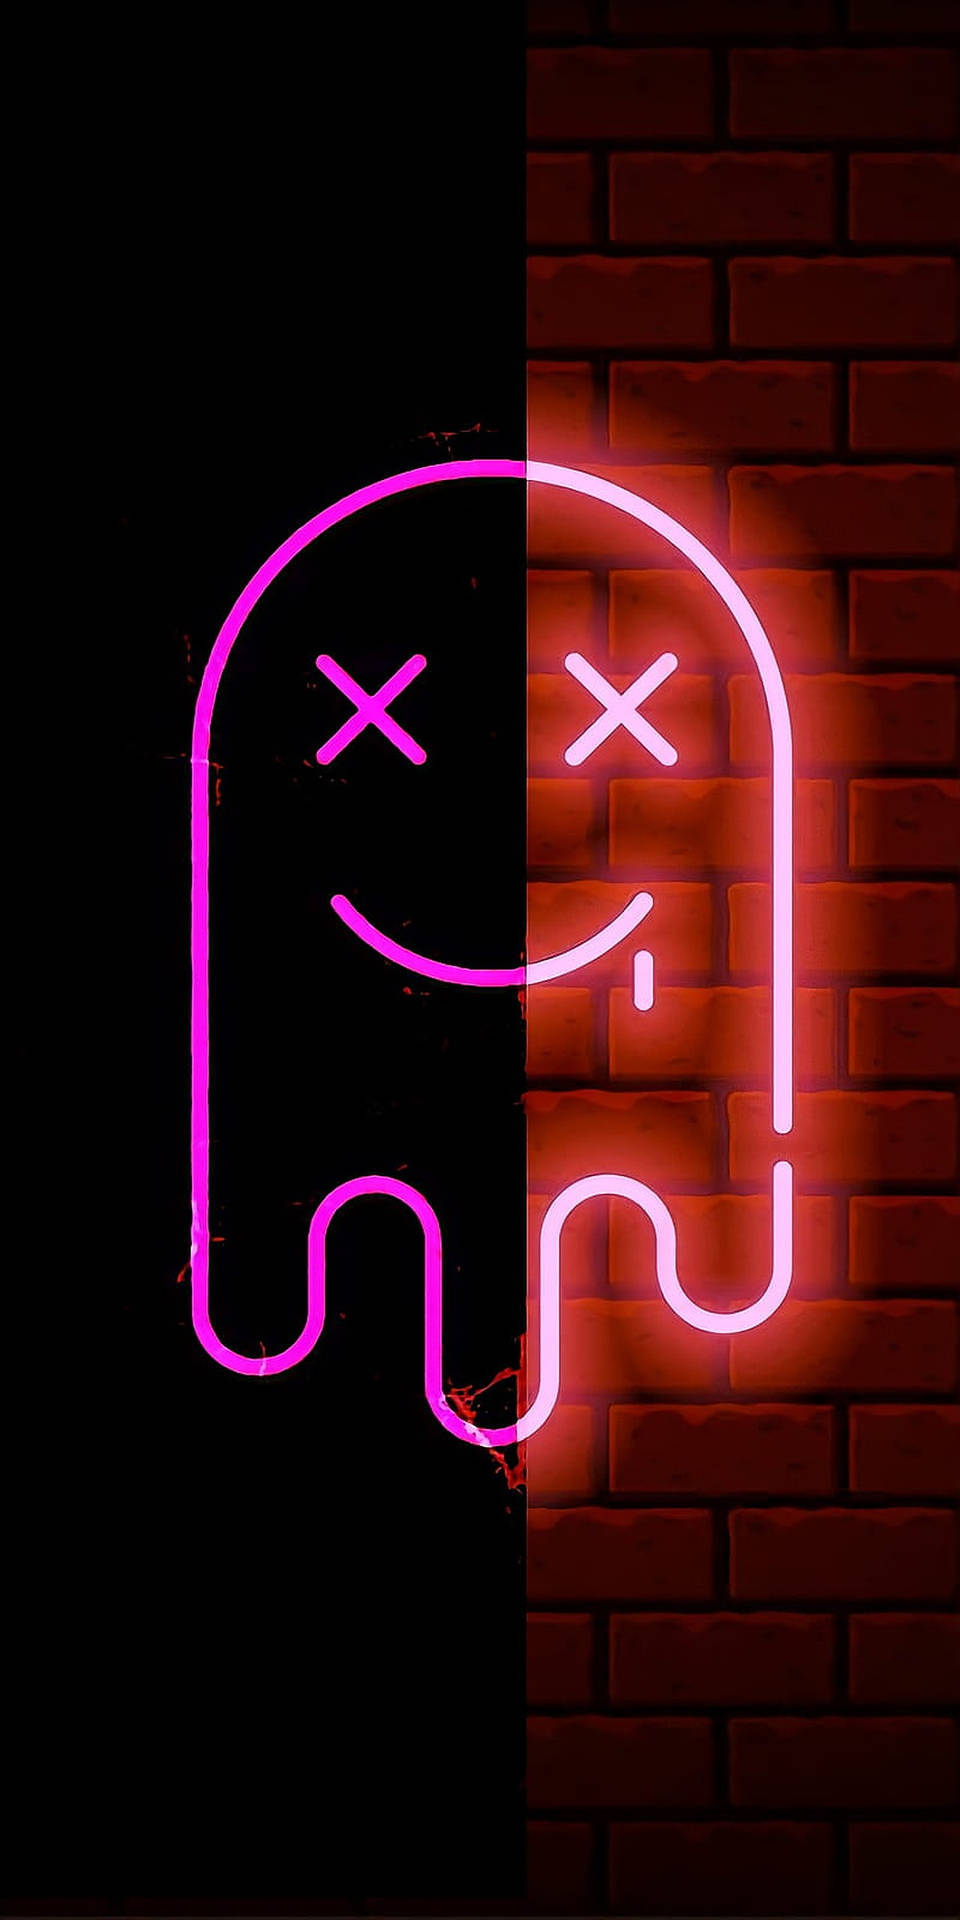 Neon Sign With A Smiling Face On A Brick Wall Wallpaper